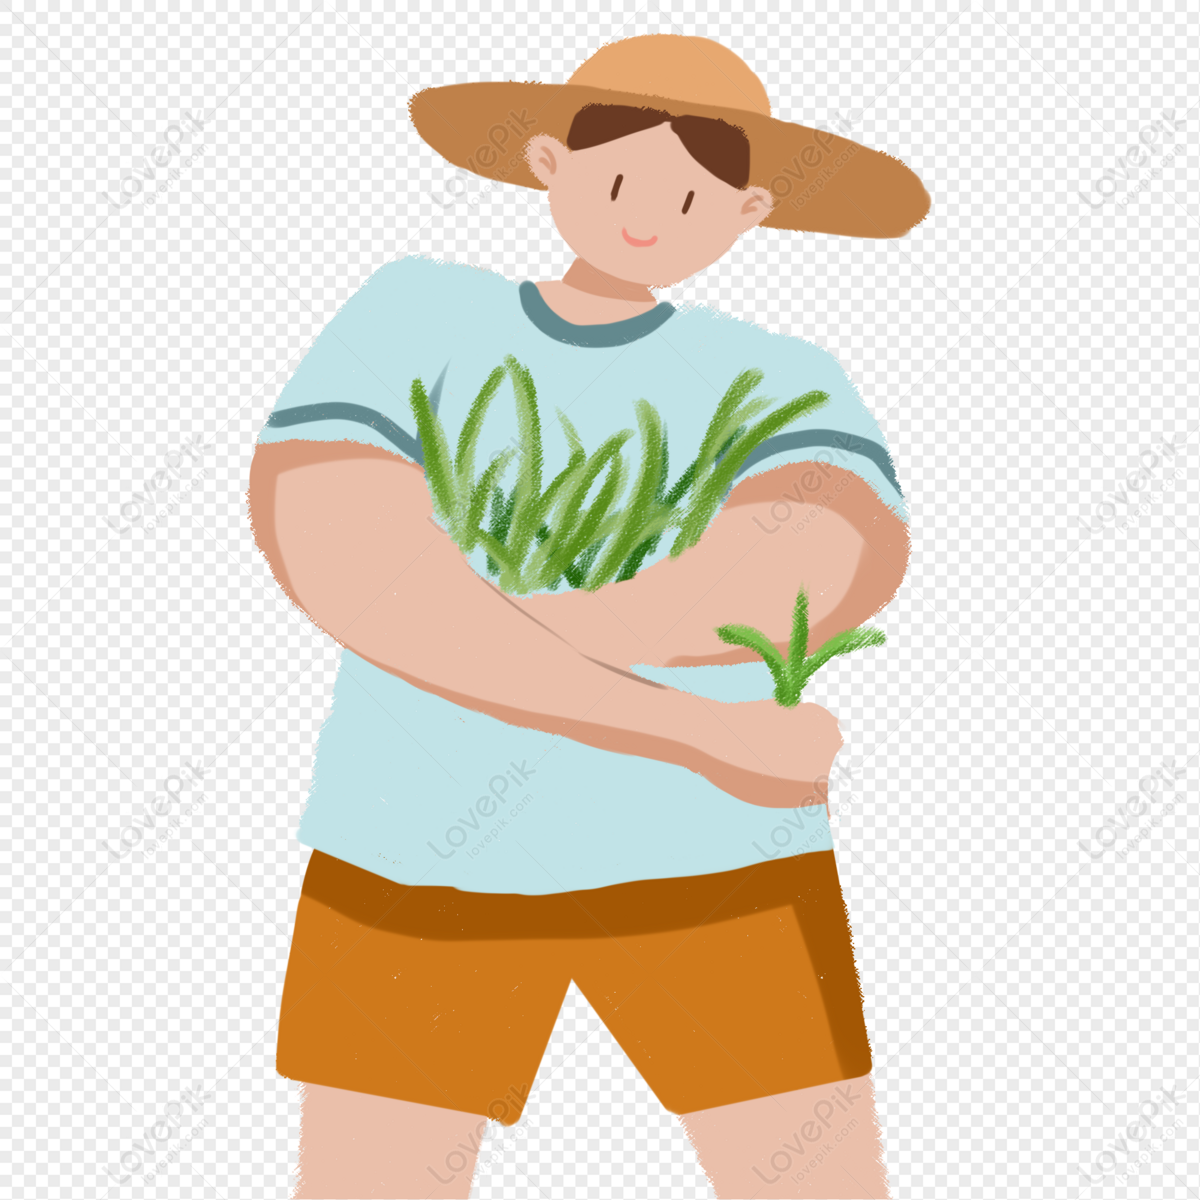 Mang Farmers PNG Transparent And Clipart Image For Free Download - Lovepik  | 401310696